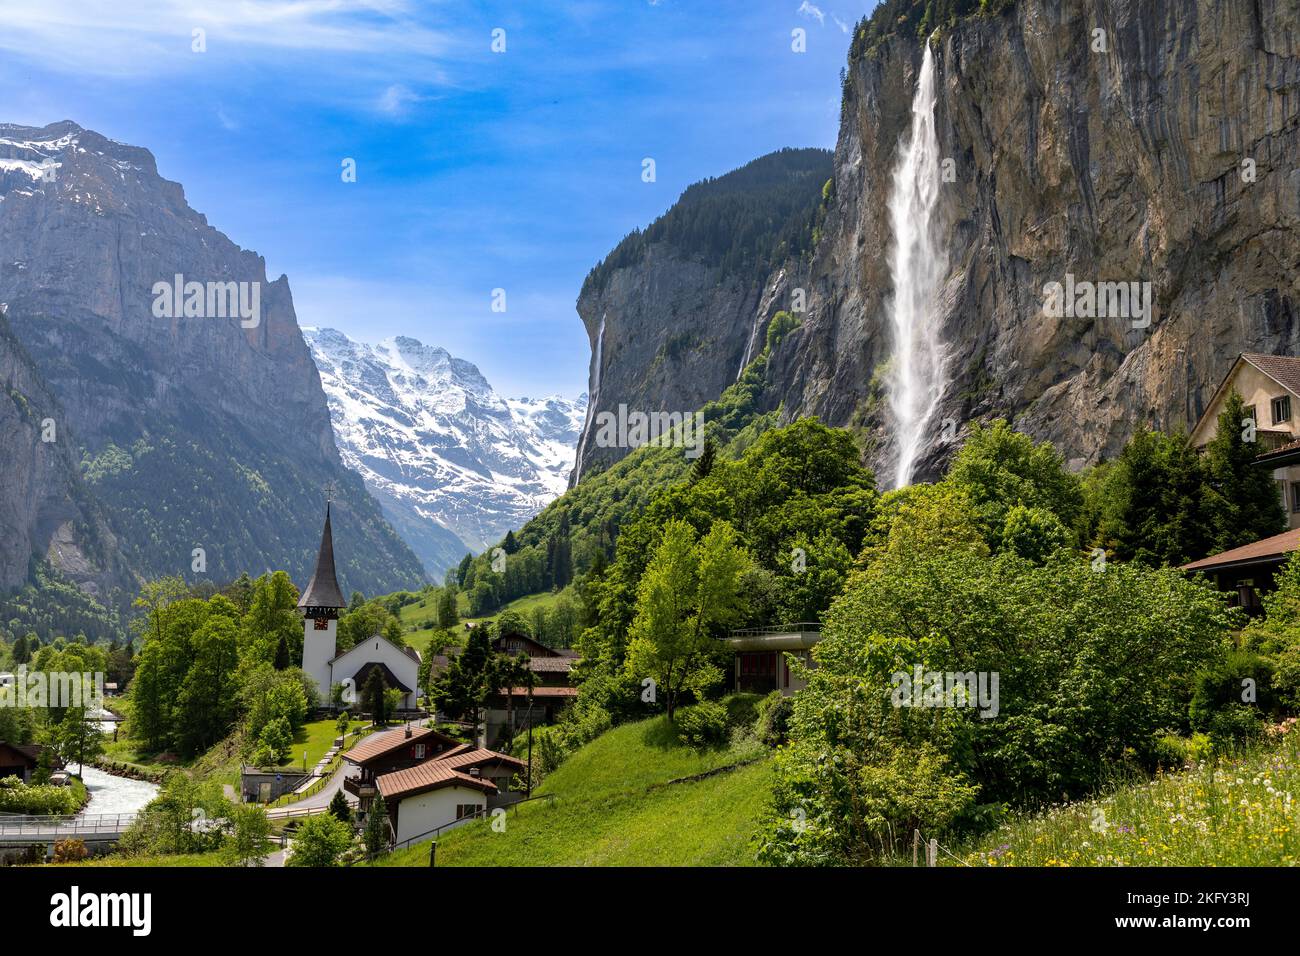 Landscape view of a part of Lauterbrunnen in Switzerland. Snow covered Alps  in the background and the Staubbach waterfall on the right Stock Photo -  Alamy